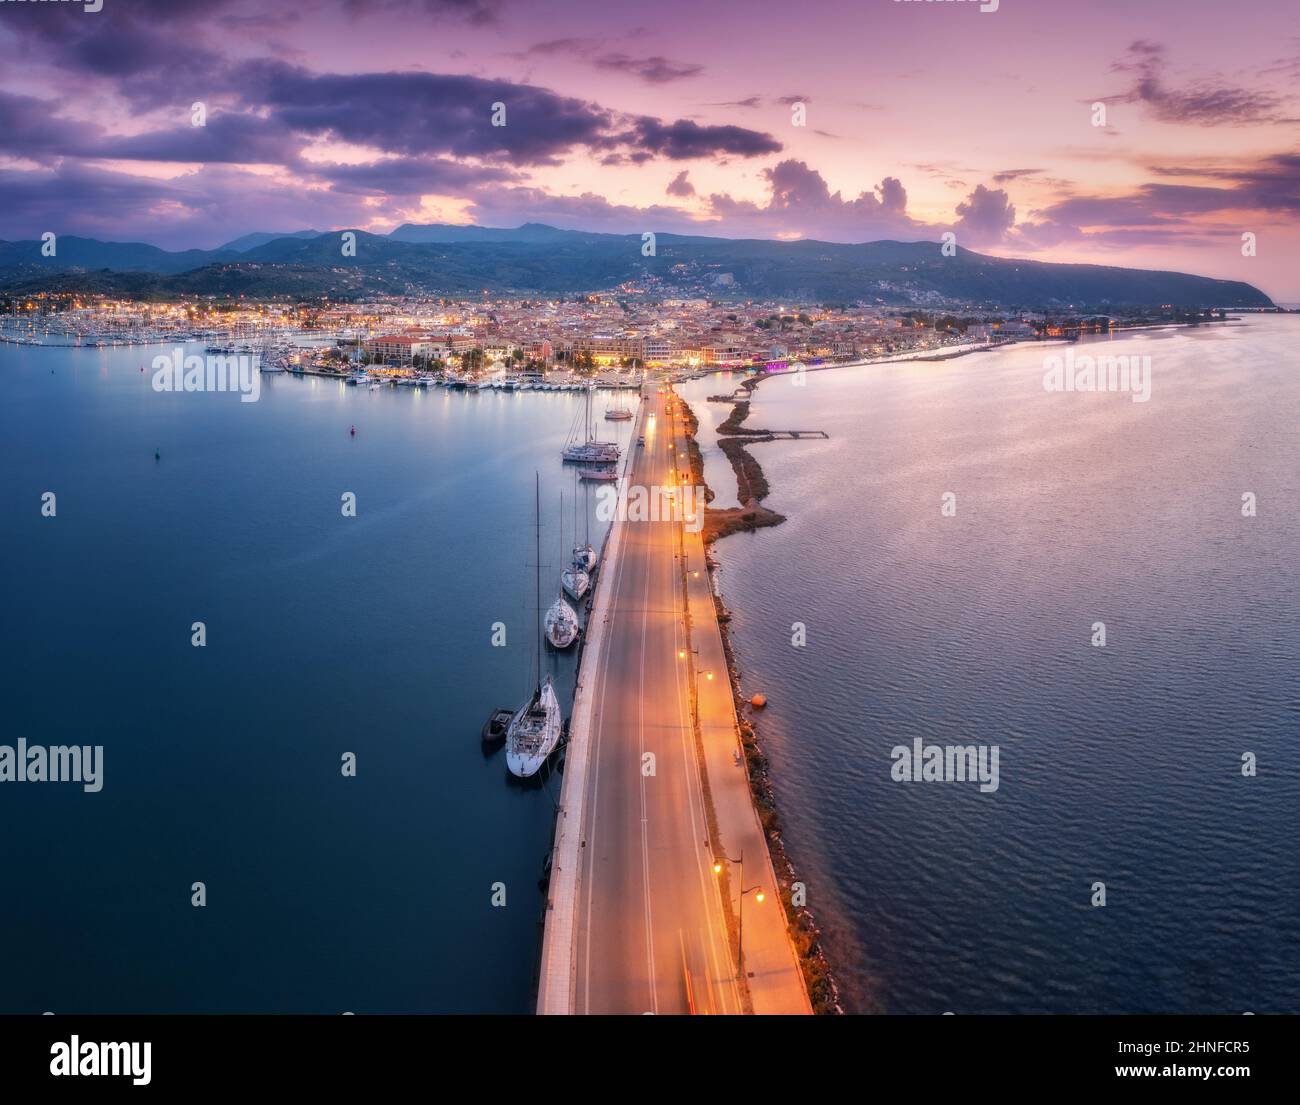 Aerial view of road and sea at night in Lefkada island, Greece Stock Photo